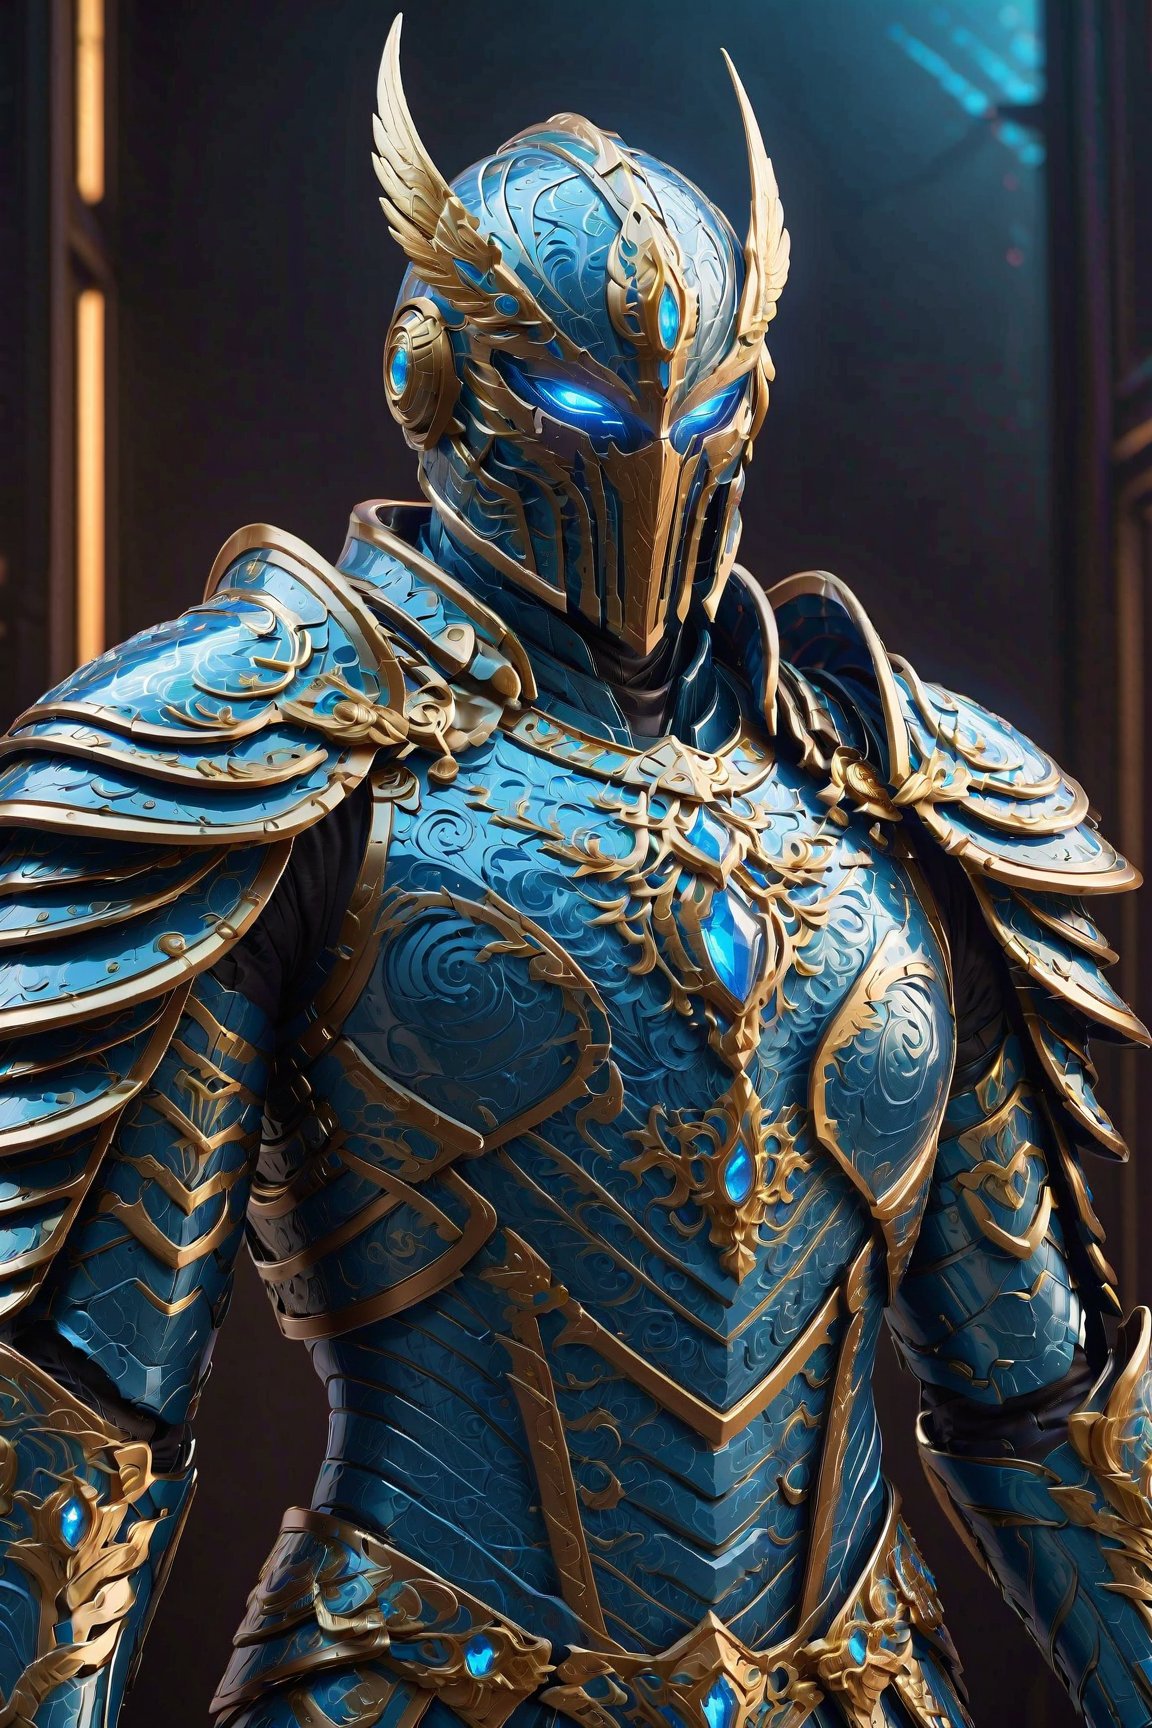 A futuristic suit of armor, crafted from shimmering dimone crystals and adorned with intricate geometric patterns. The armor glows with a soft blue light, emanating power and protection.